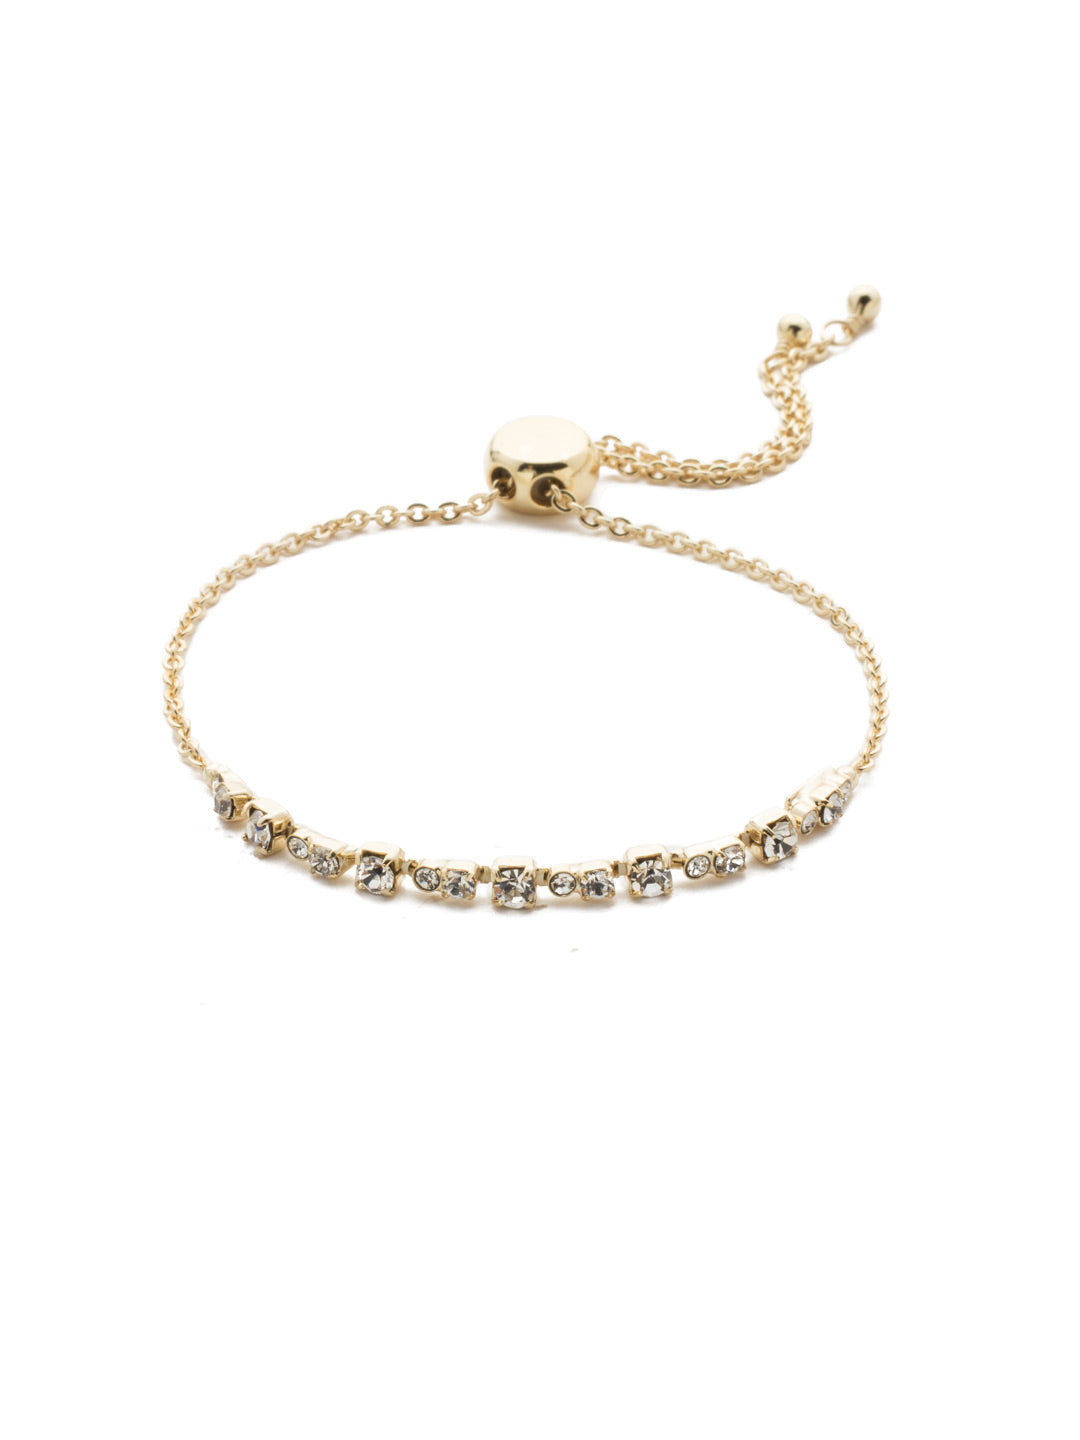 Glimmer Slider Bracelet - BEK14BGCRY - <p>Add a bit of sparkle and shine to your wrist by sliding on this adjustable beauty with just enough bling to get you noticed. Slider bracelet closure. From Sorrelli's Crystal collection in our Bright Gold-tone finish.</p>